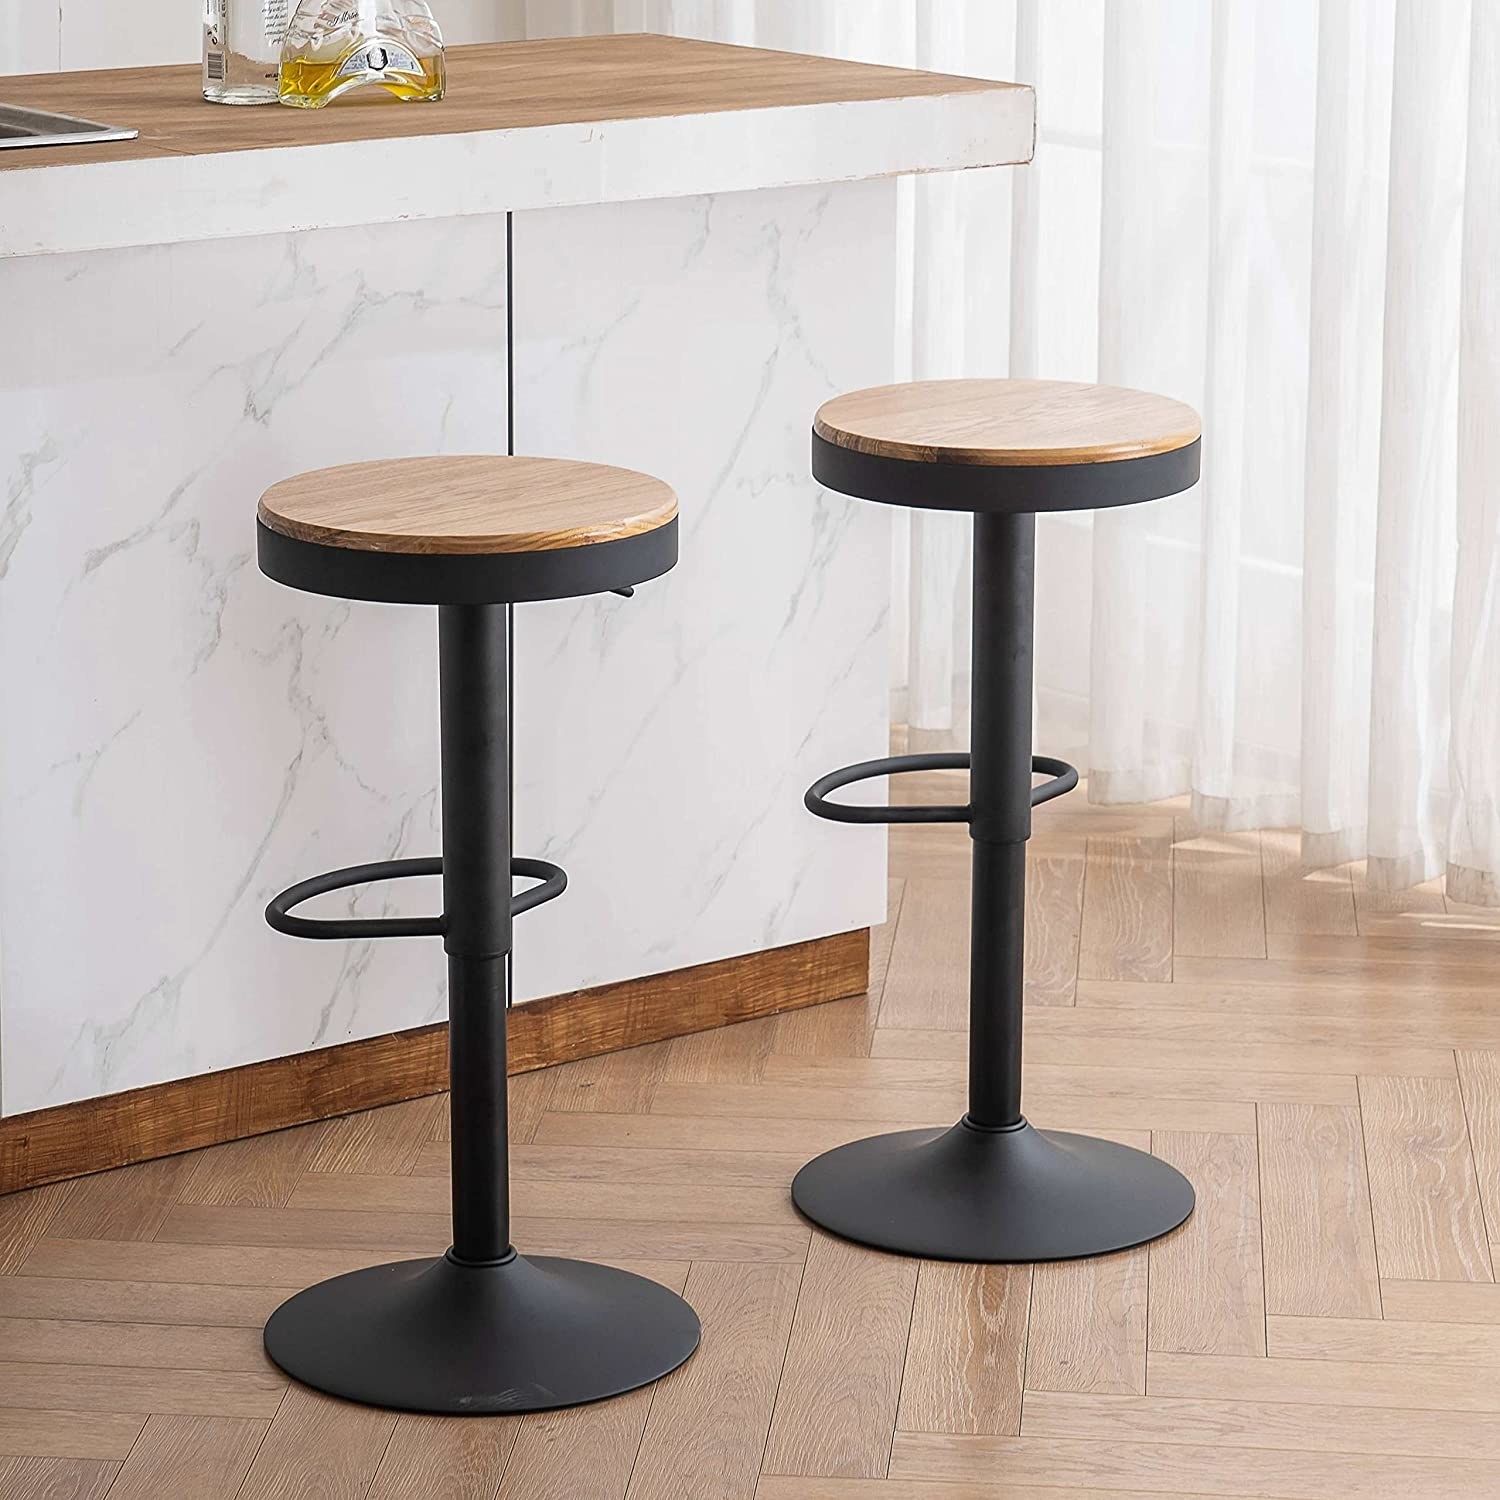 the bar stools next to a kitchen counter